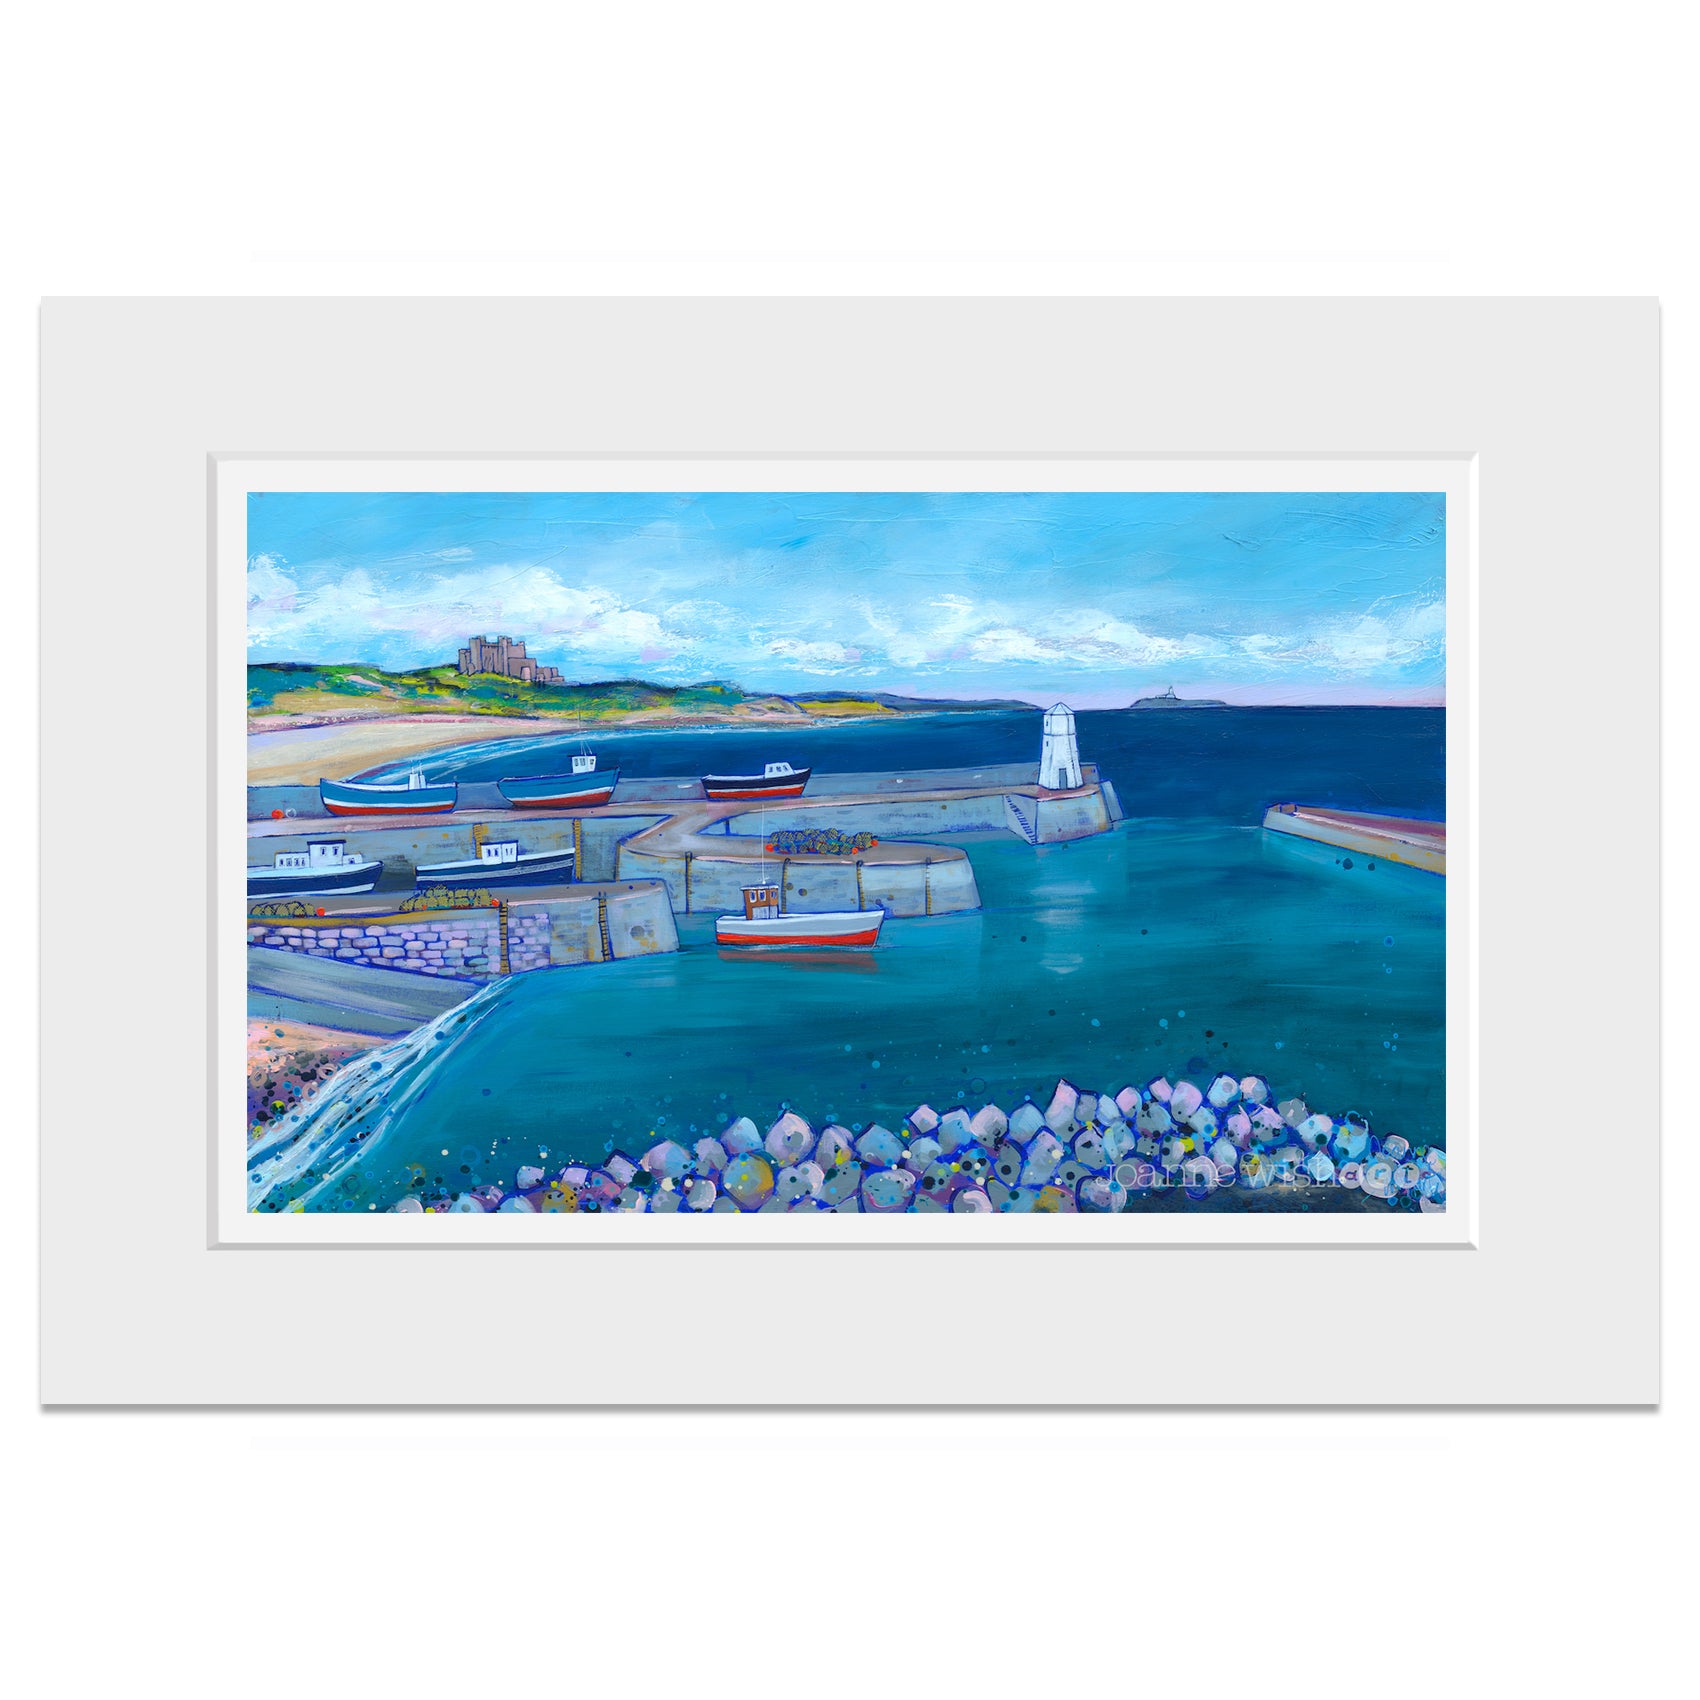 A mounted print of Seahorses harbour in Northumberland.